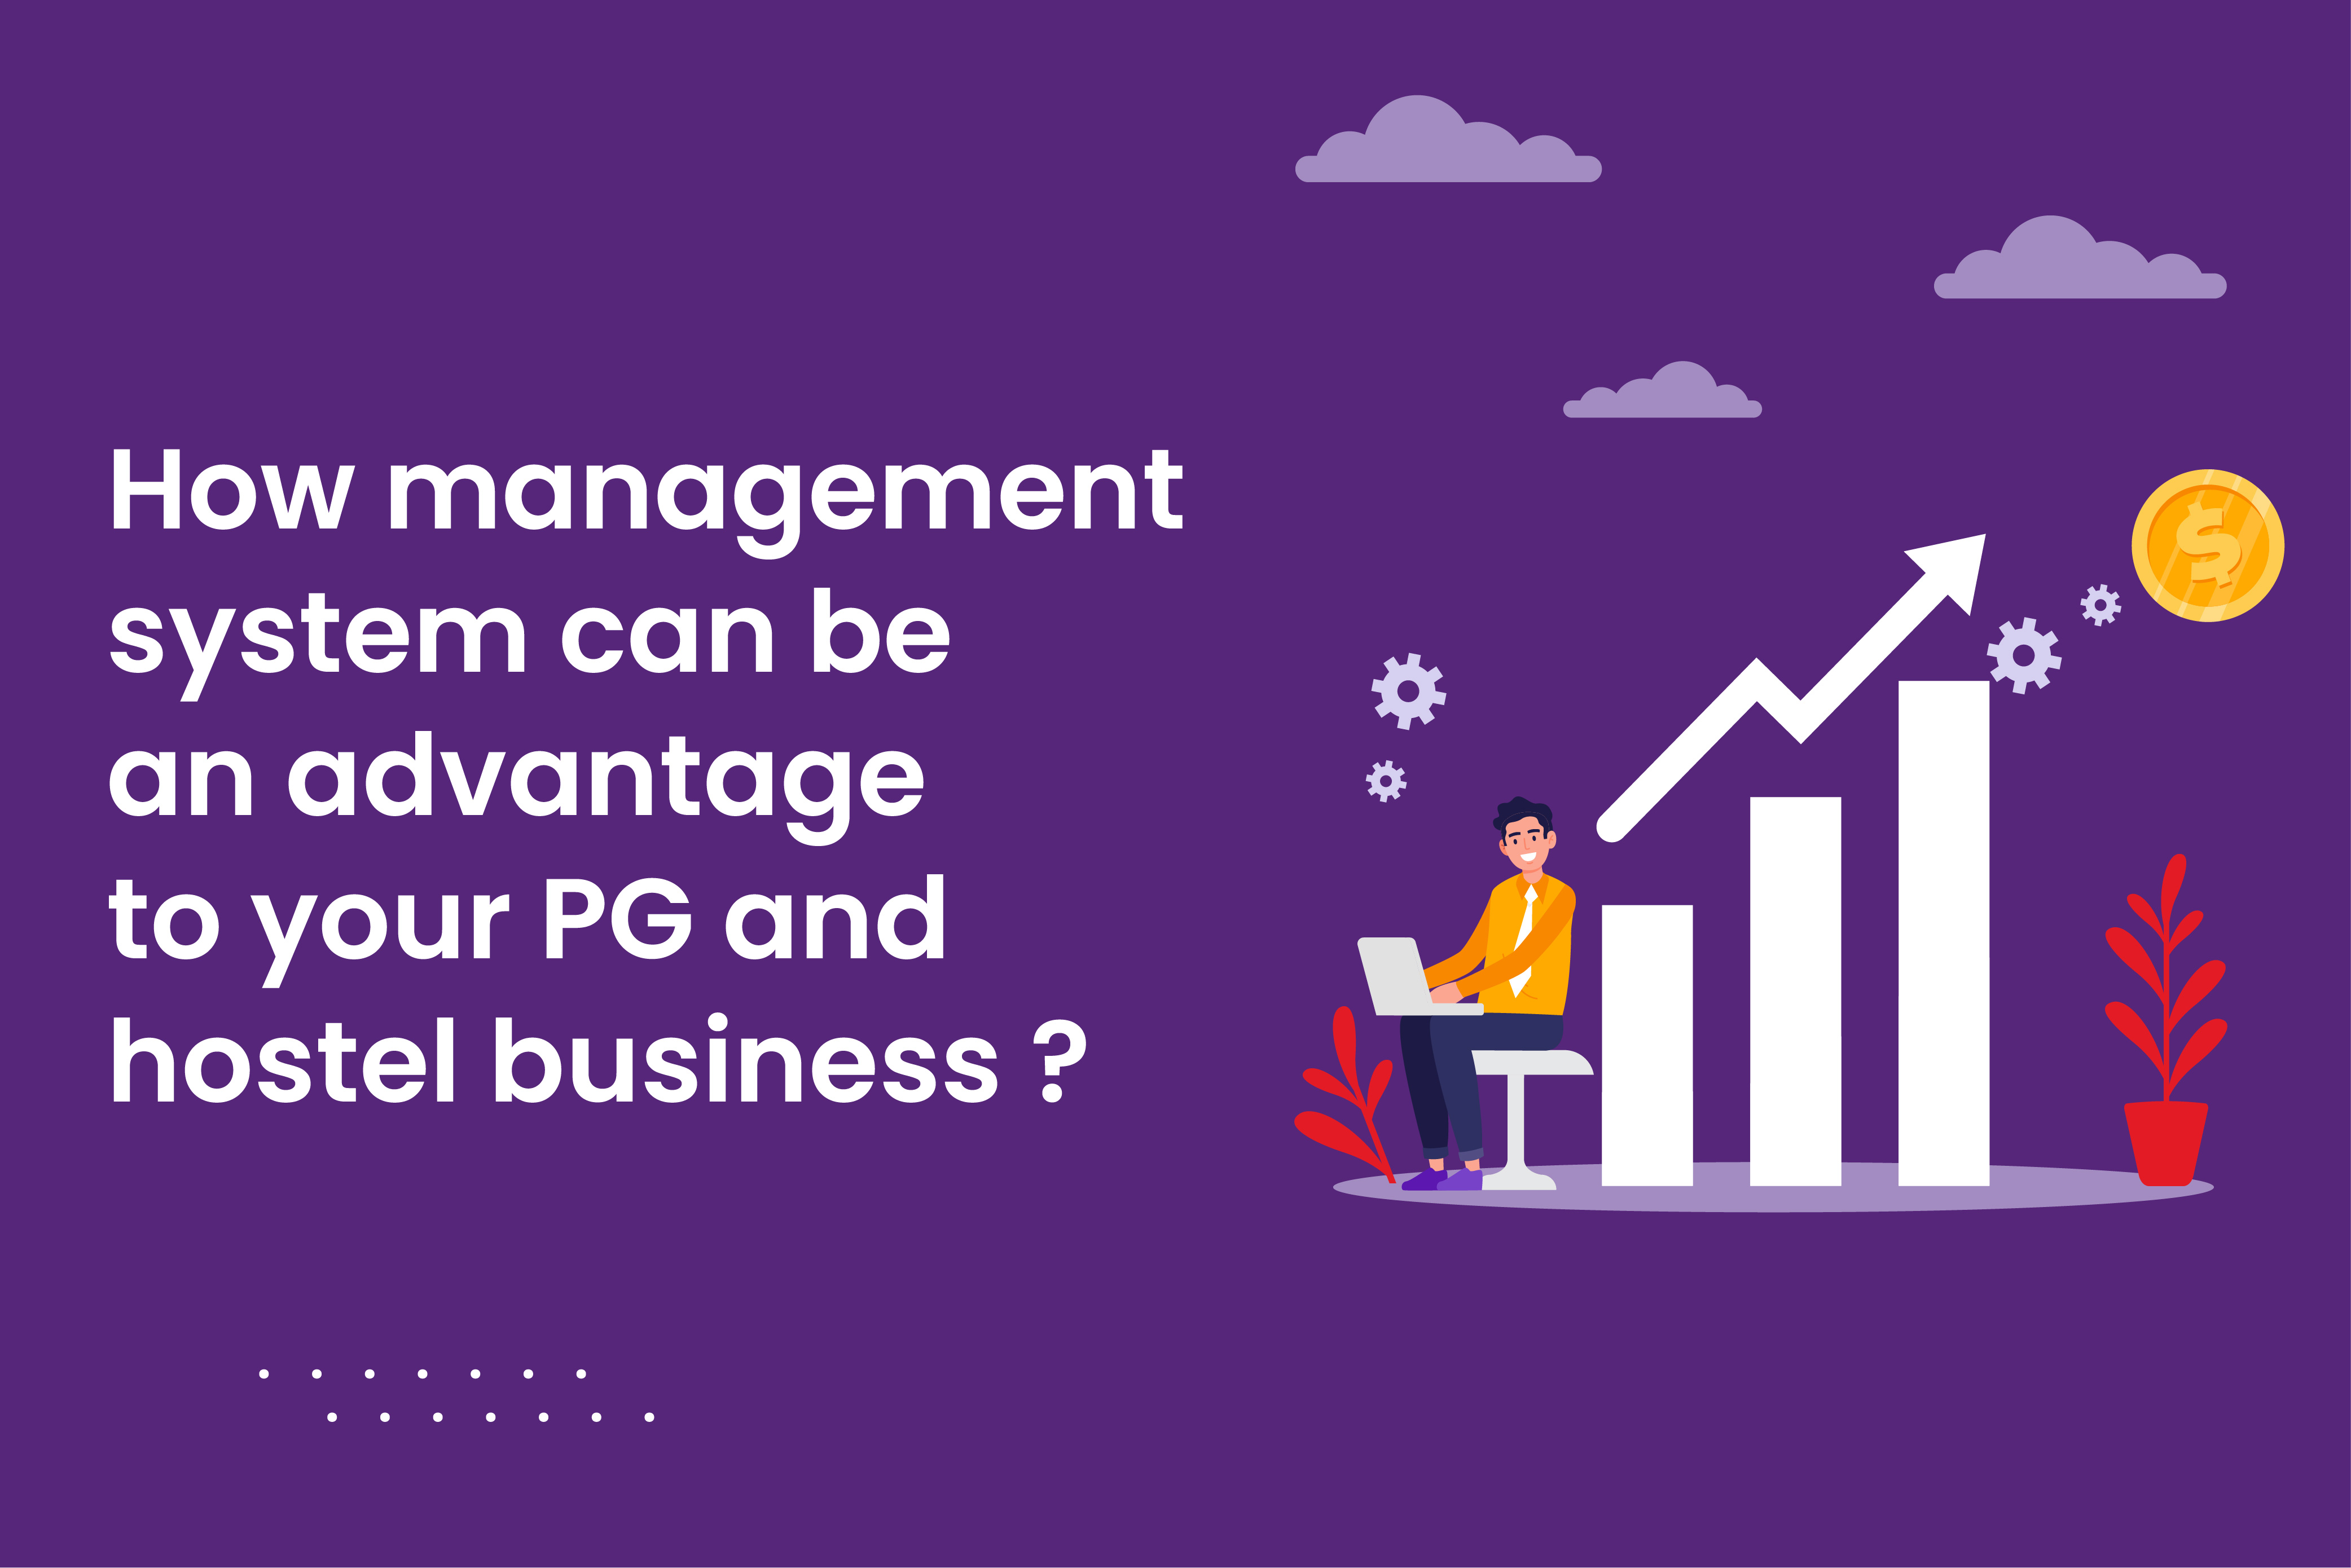 How management system can be an advantage to your PG and hostel business ?